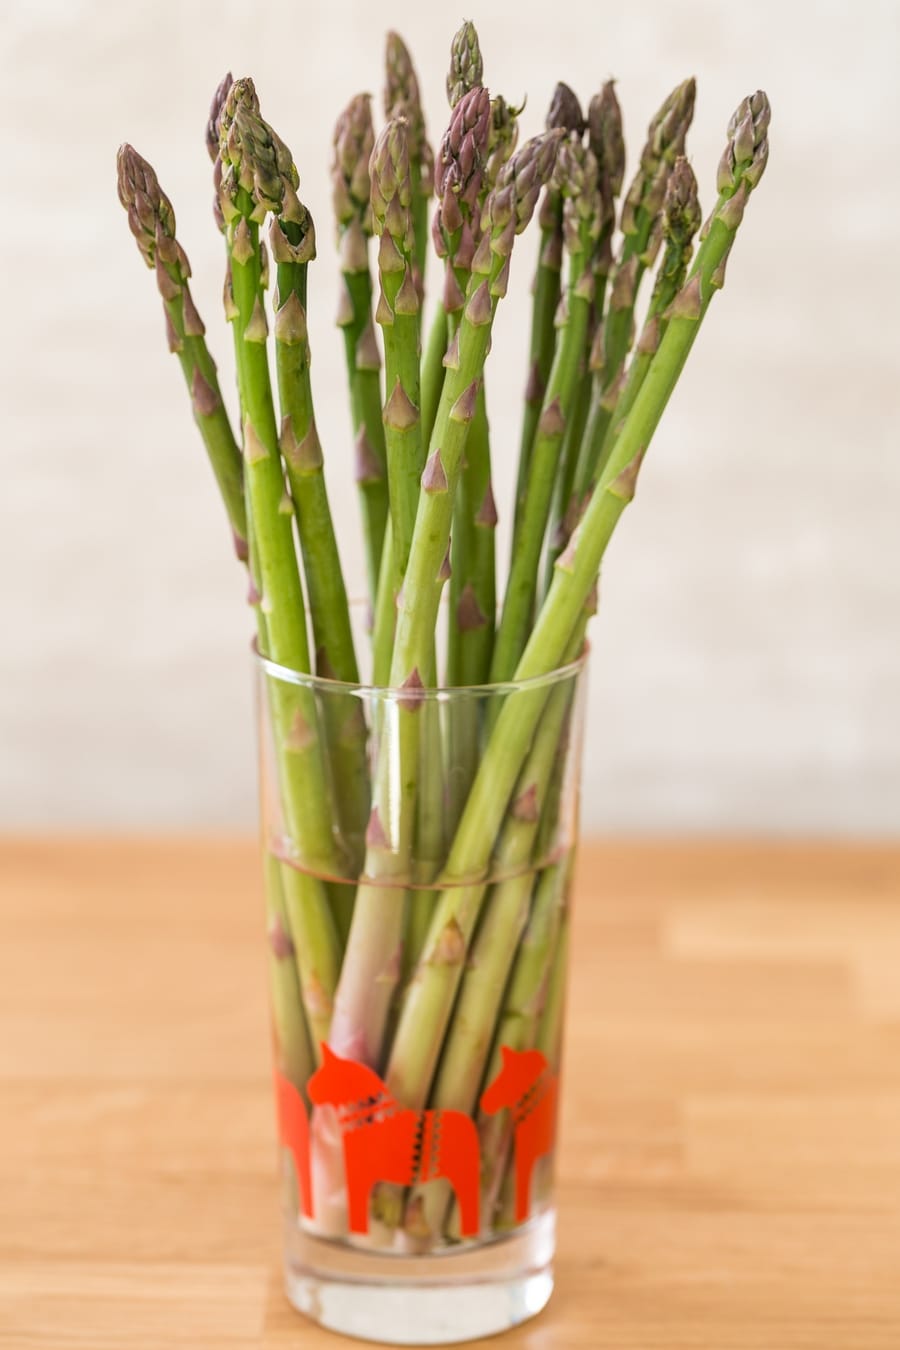 Bunch of green asparagus ina glass of water for longer keeping.